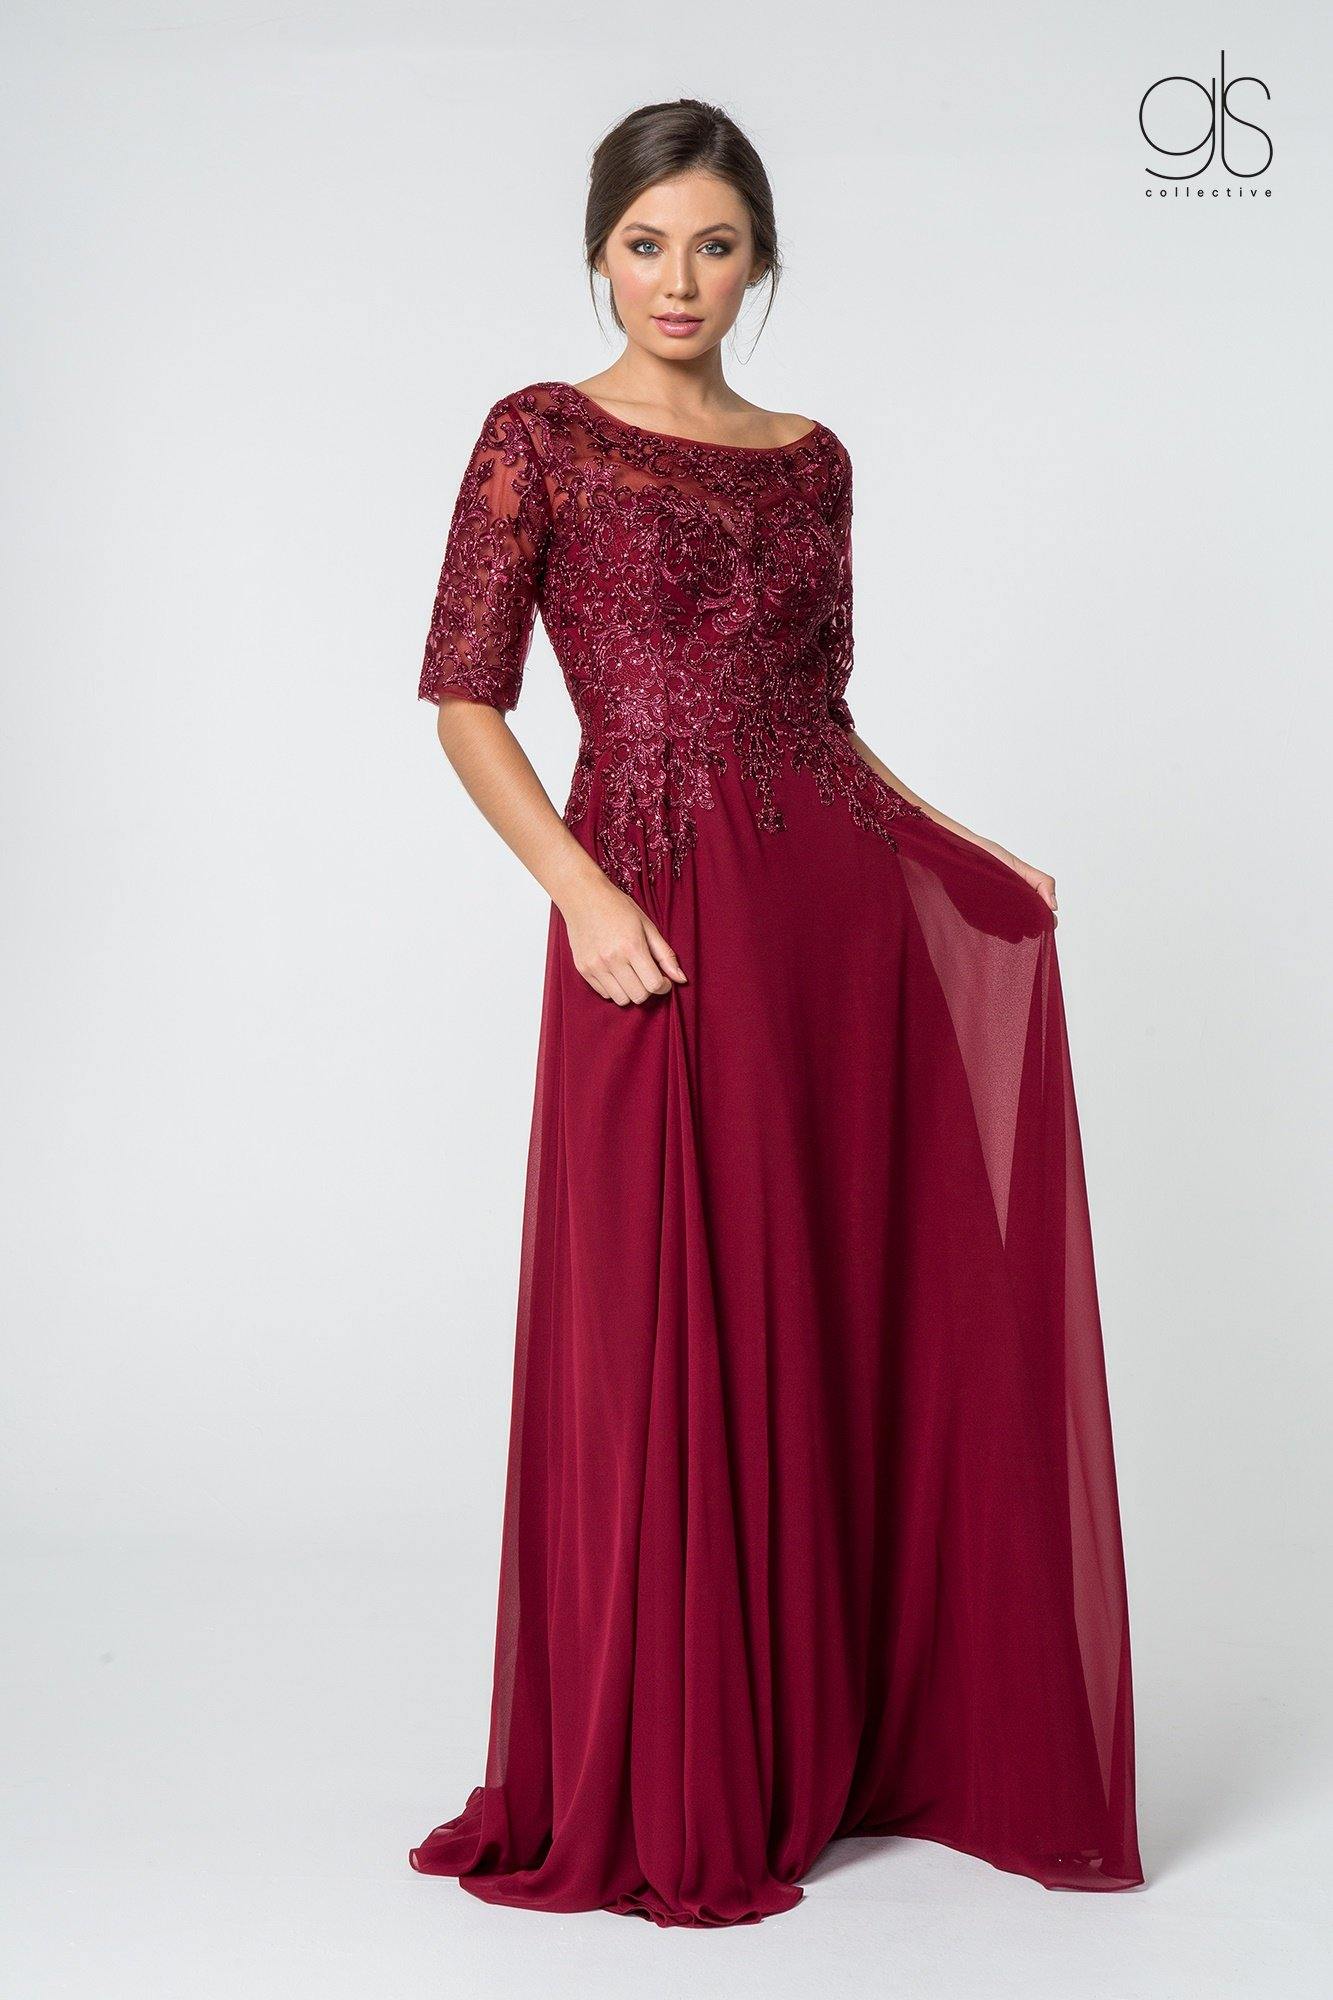 Long Mother of the Bride Dress Sale - The Dress Outlet